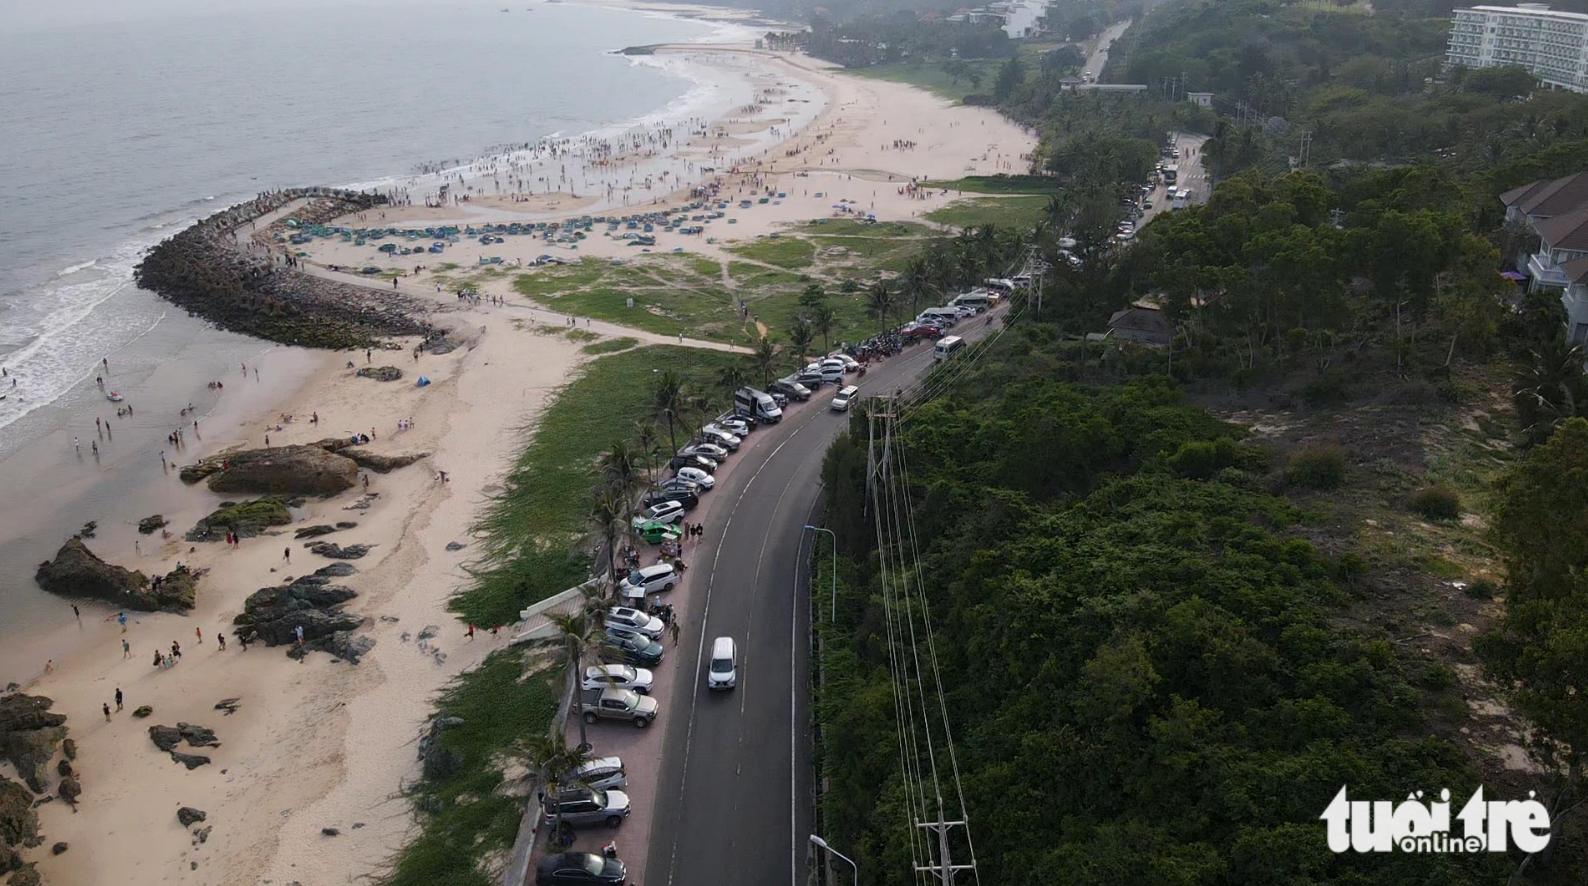 Many cars are parked along a seaside road in Phan Thiet City. Photo: Duc Trong / Tuoi Tre